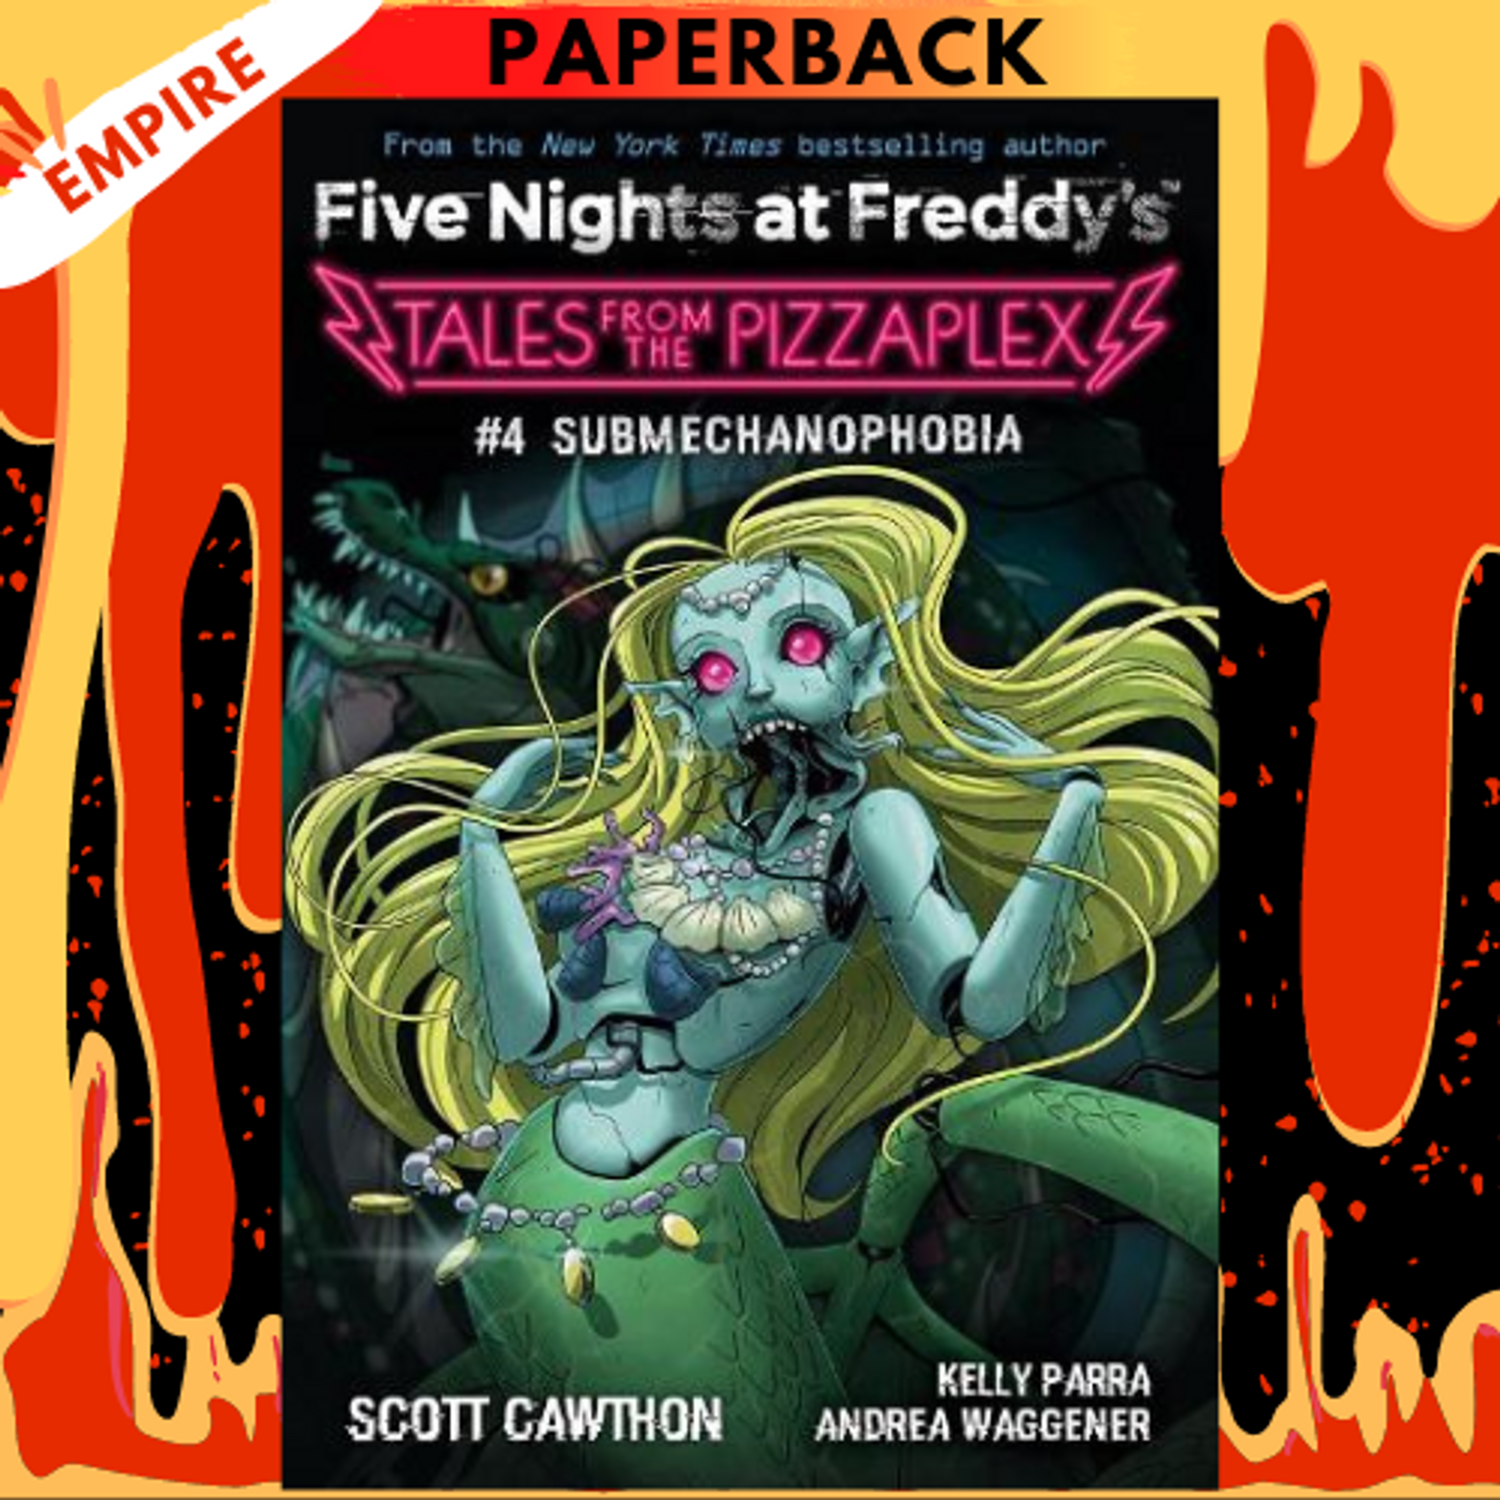 Nexie (Tales from the Pizzaplex, #6) by Scott Cawthon